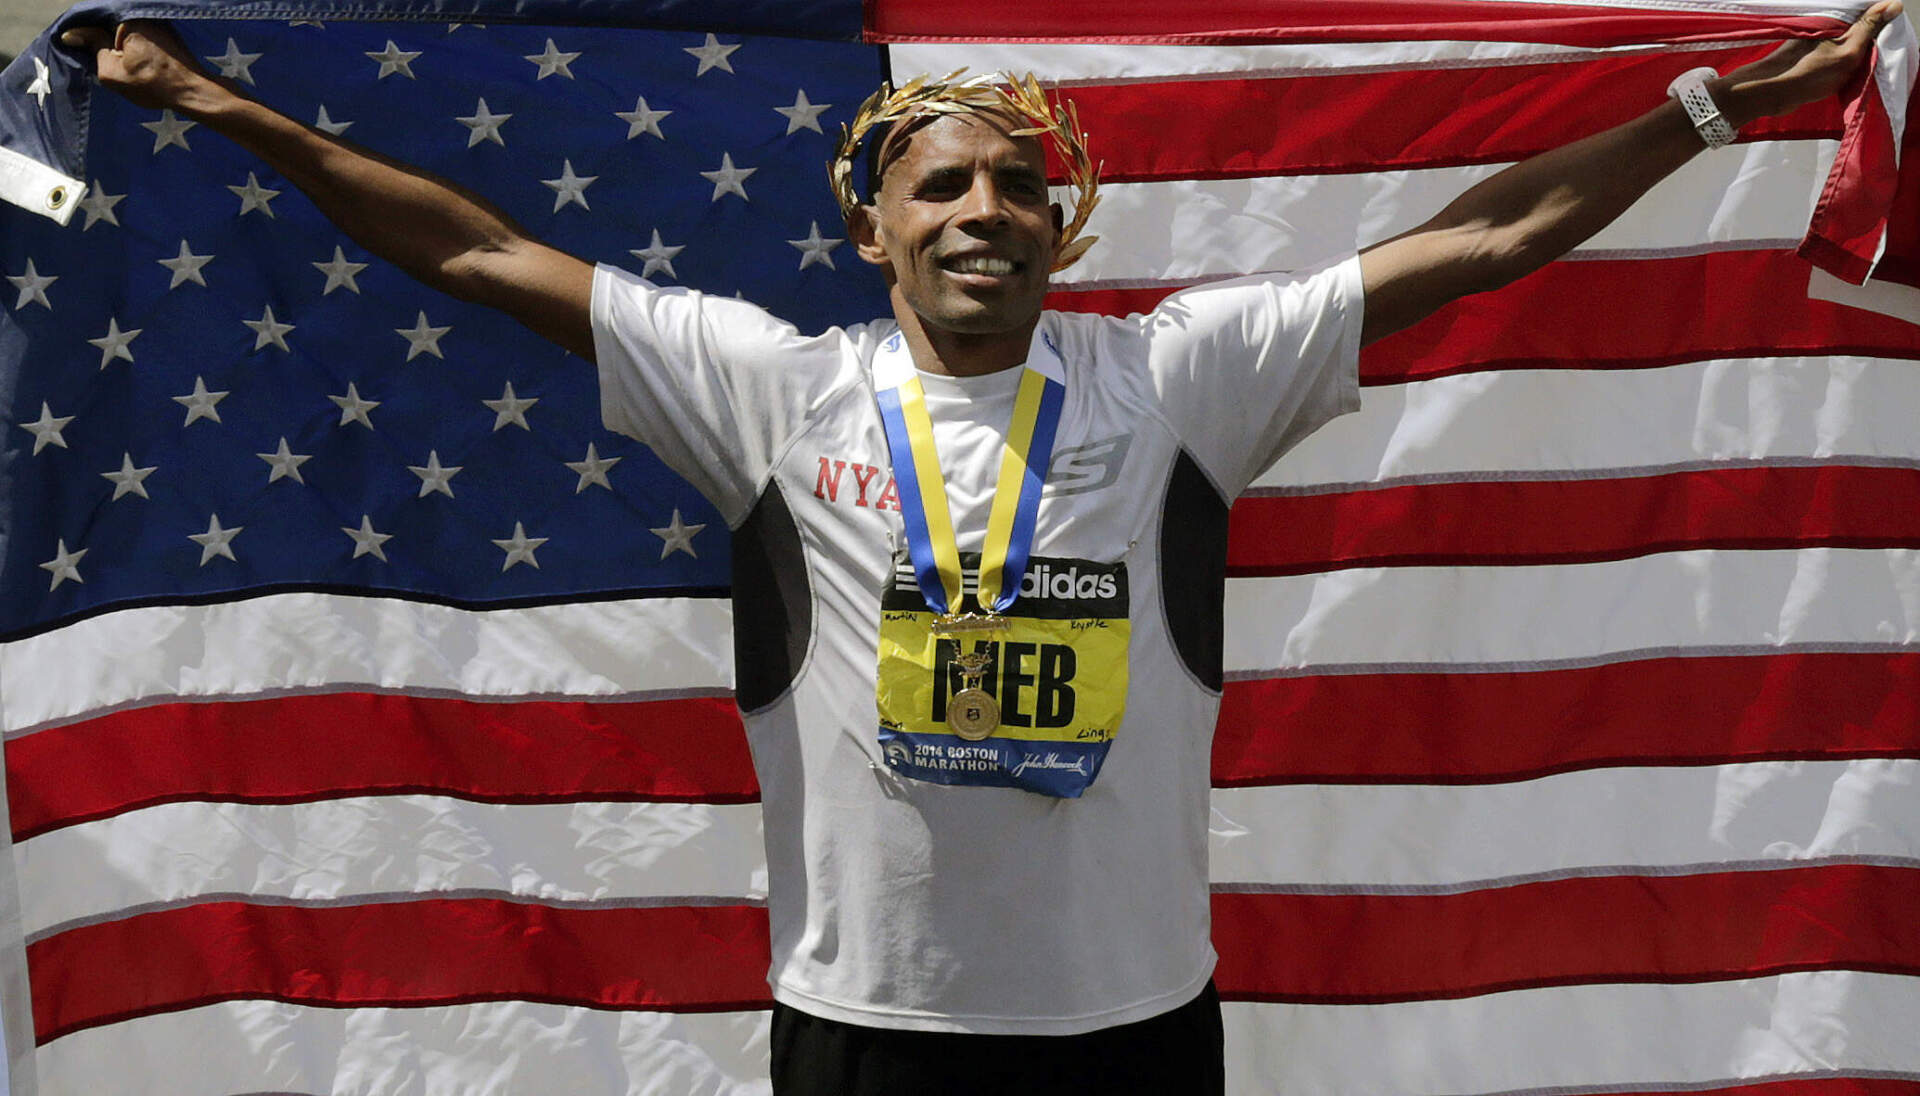 Meb Keflezighi celebrates his victory with an American flag after the 118th Boston Marathon April 21, 2014 in Boston. (Charles Krupa/AP)